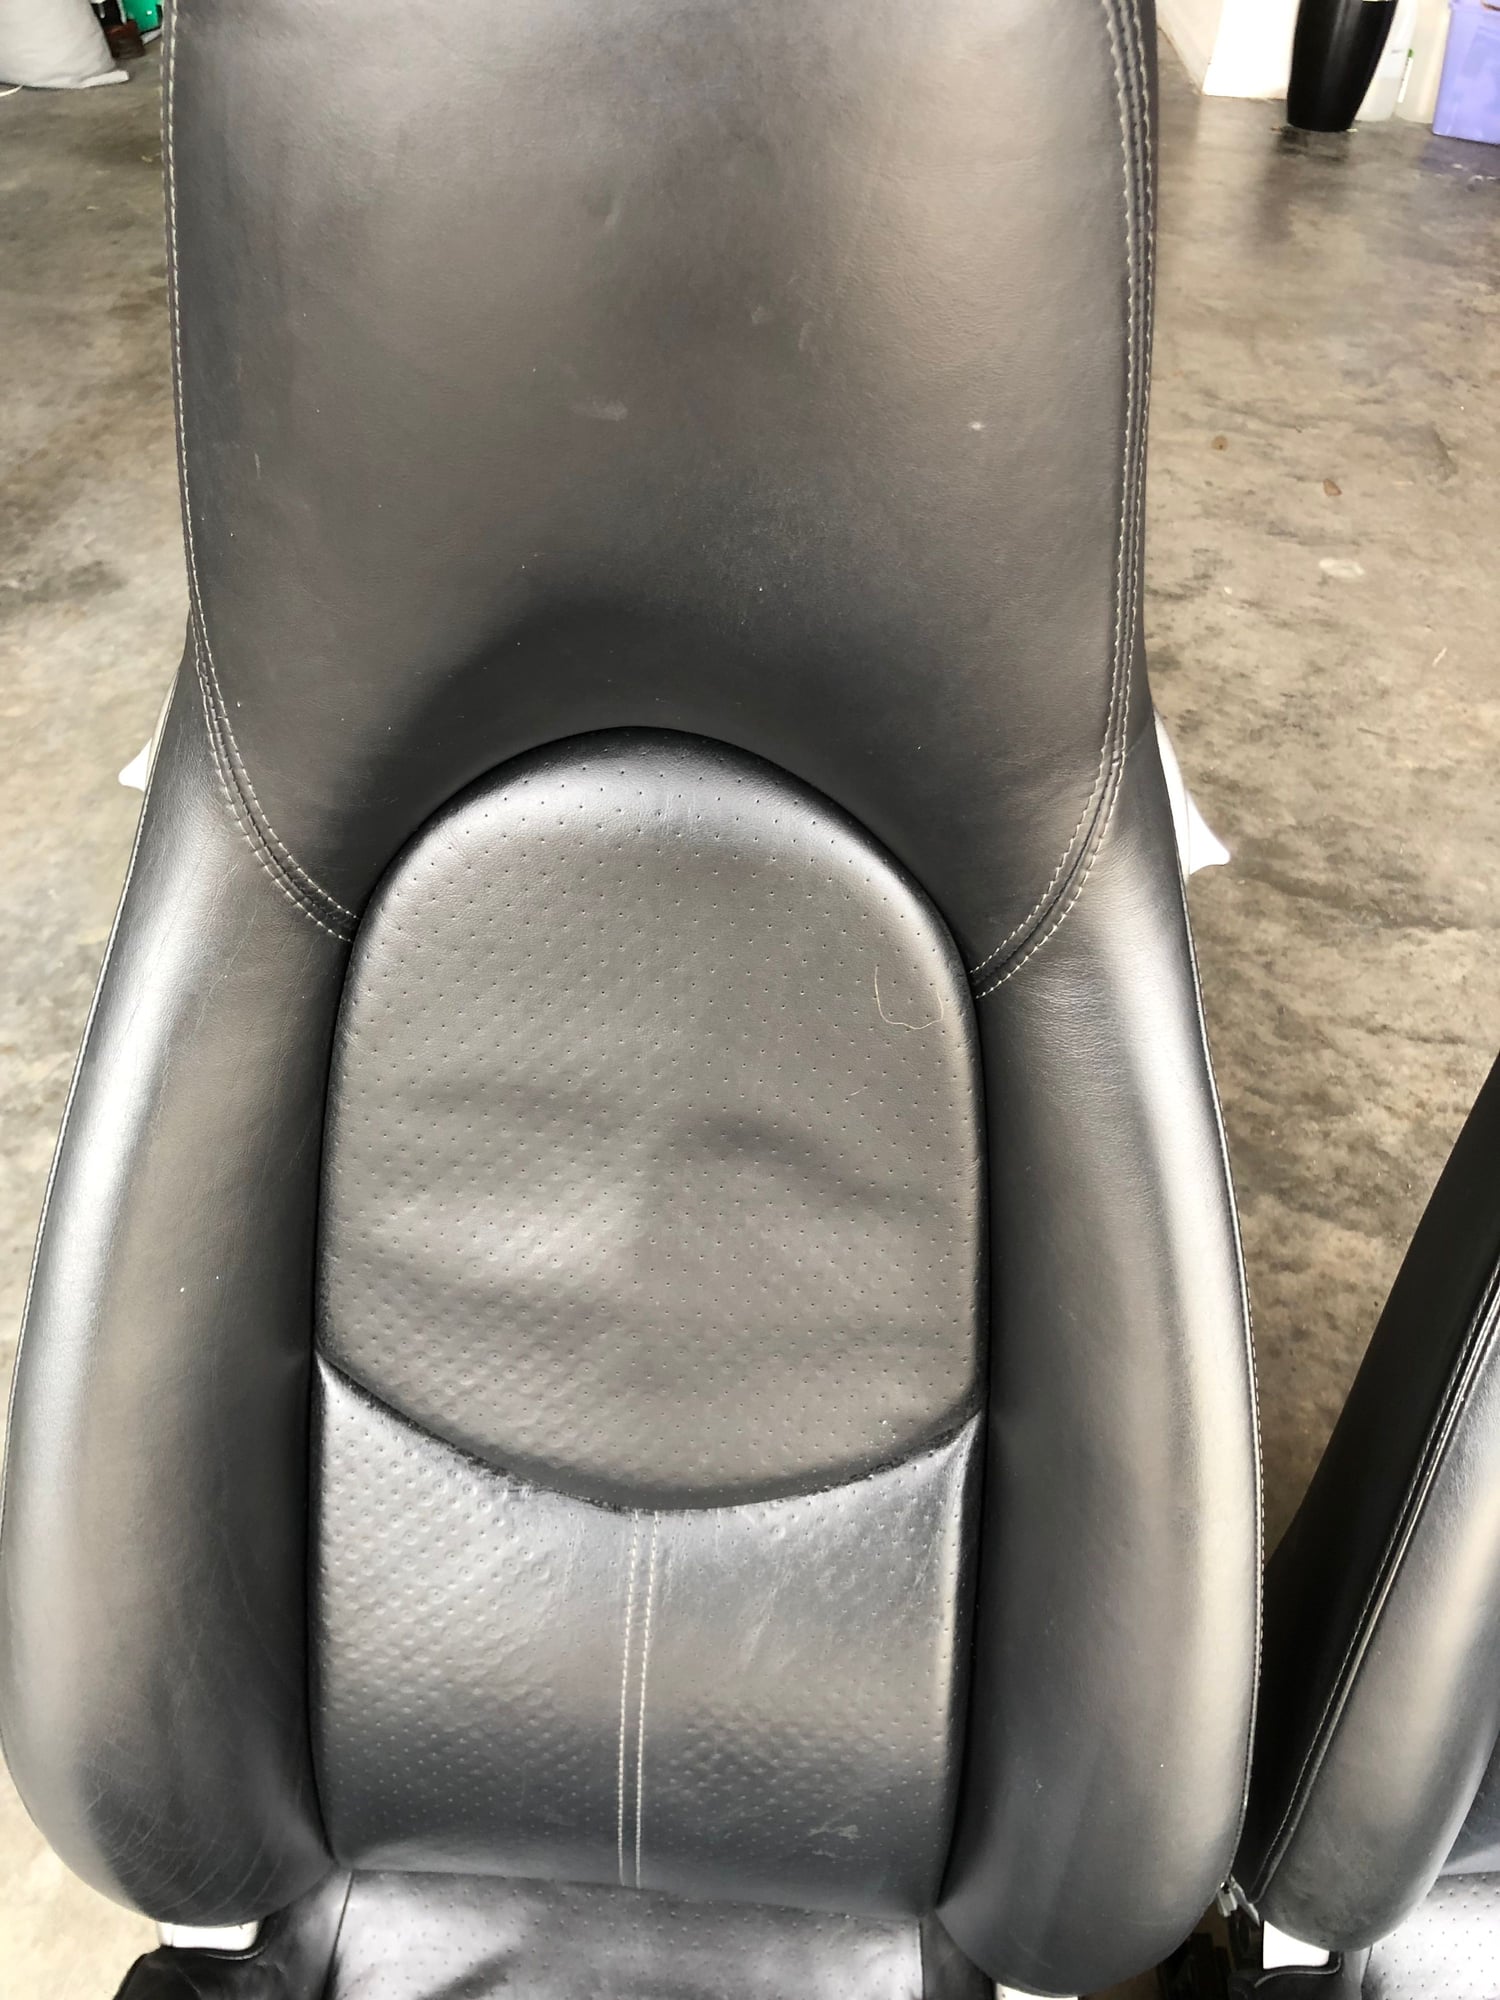 Interior/Upholstery - 997 Turbo power seats - Used - 2007 to 2016 Porsche 911 - 2007 to 2016 Porsche Boxster - Melbourne, FL 32904, United States